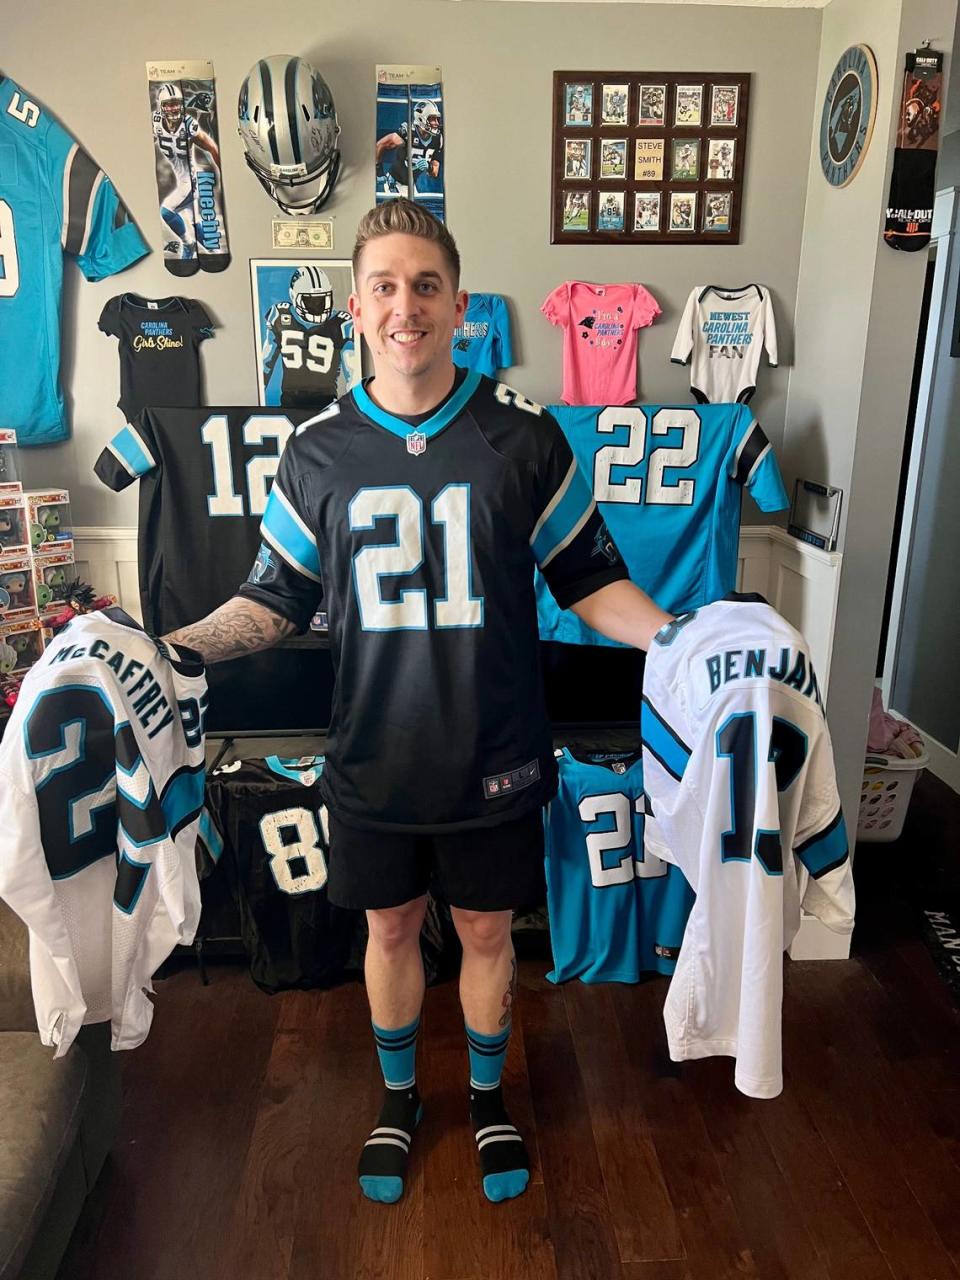 Charlotte native and Carolina Panthers superfan went viral for a video he posted on Instagram about his jersey collection. Players took notice and responded in good fun.